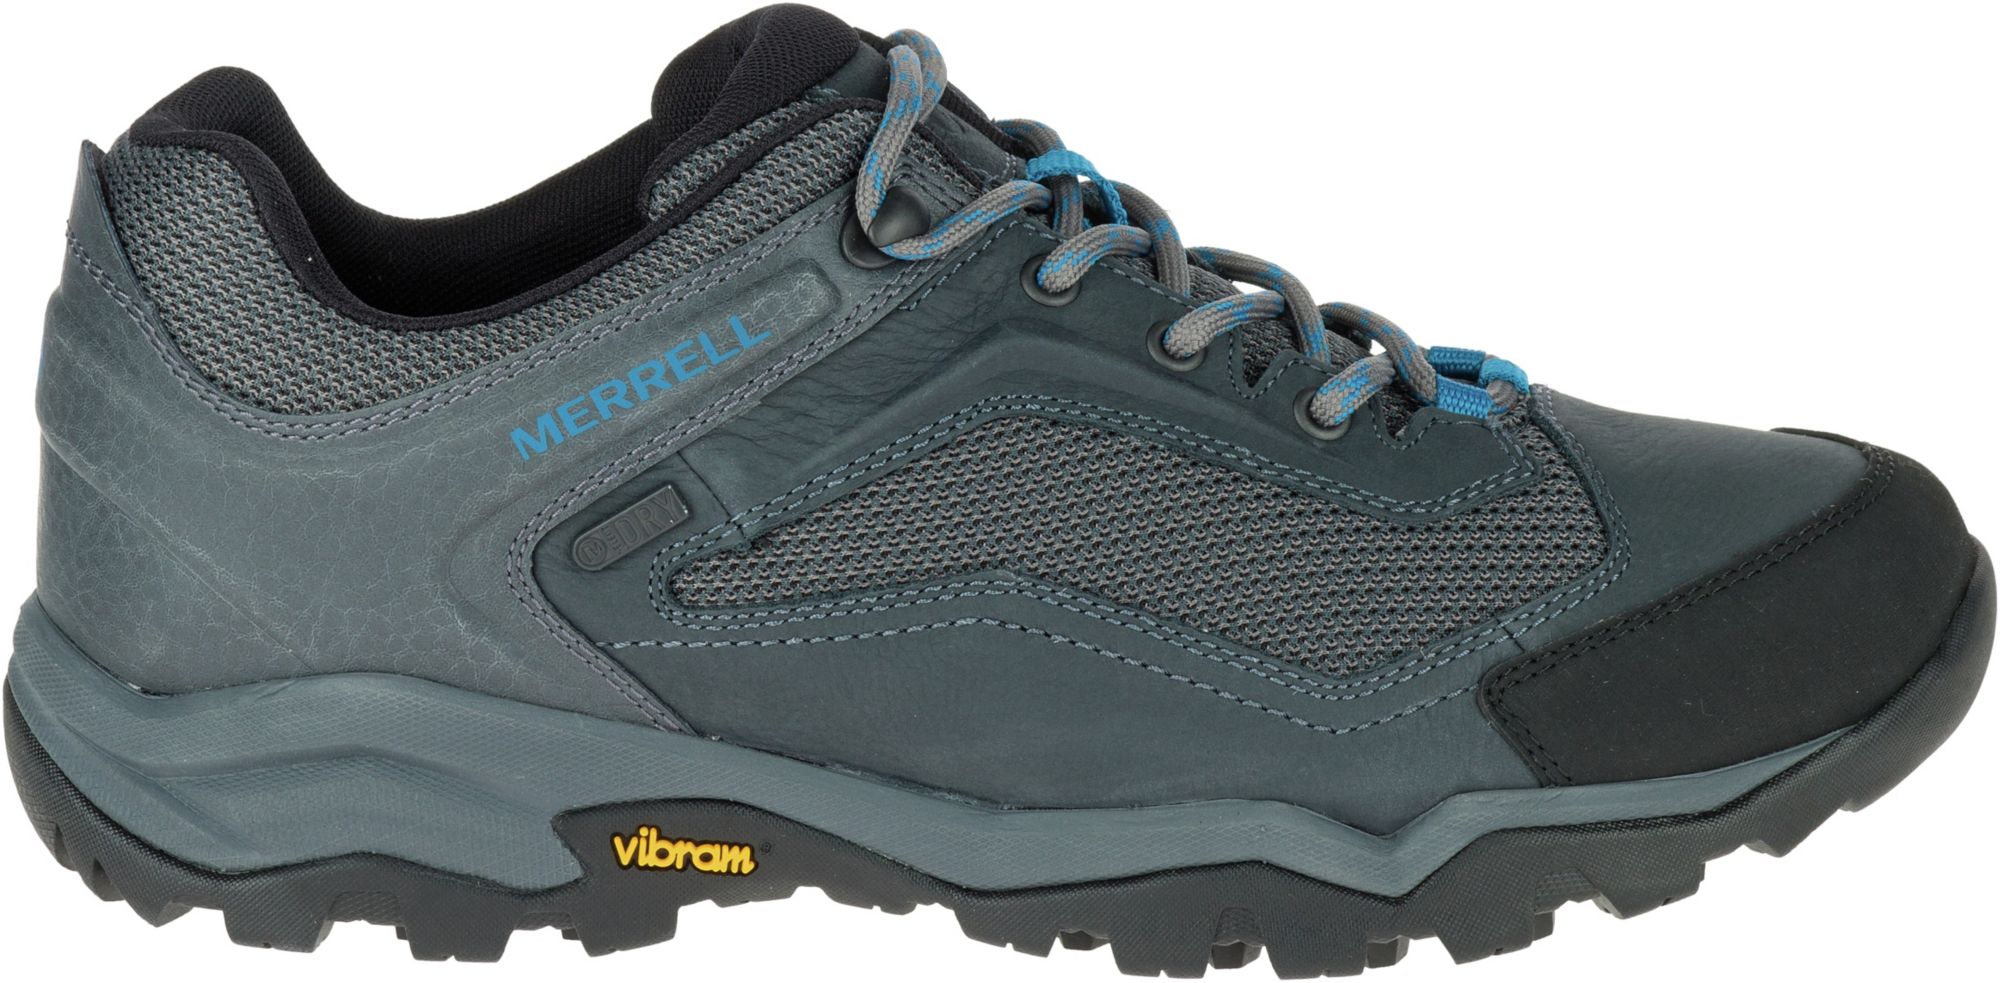 Merrell Hiking Shoes & Boots | DICK'S Sporting Goods